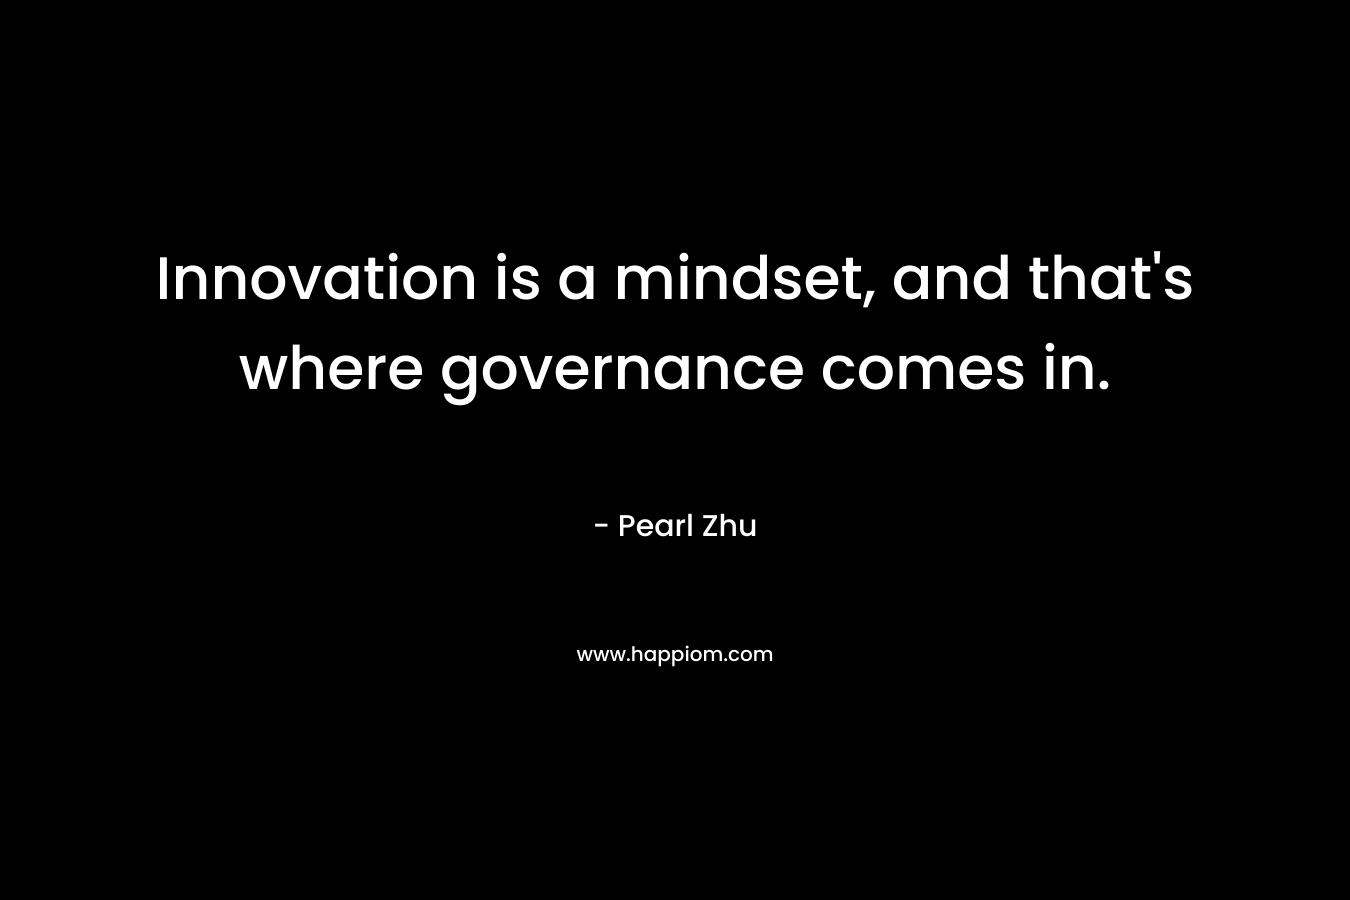 Innovation is a mindset, and that's where governance comes in.